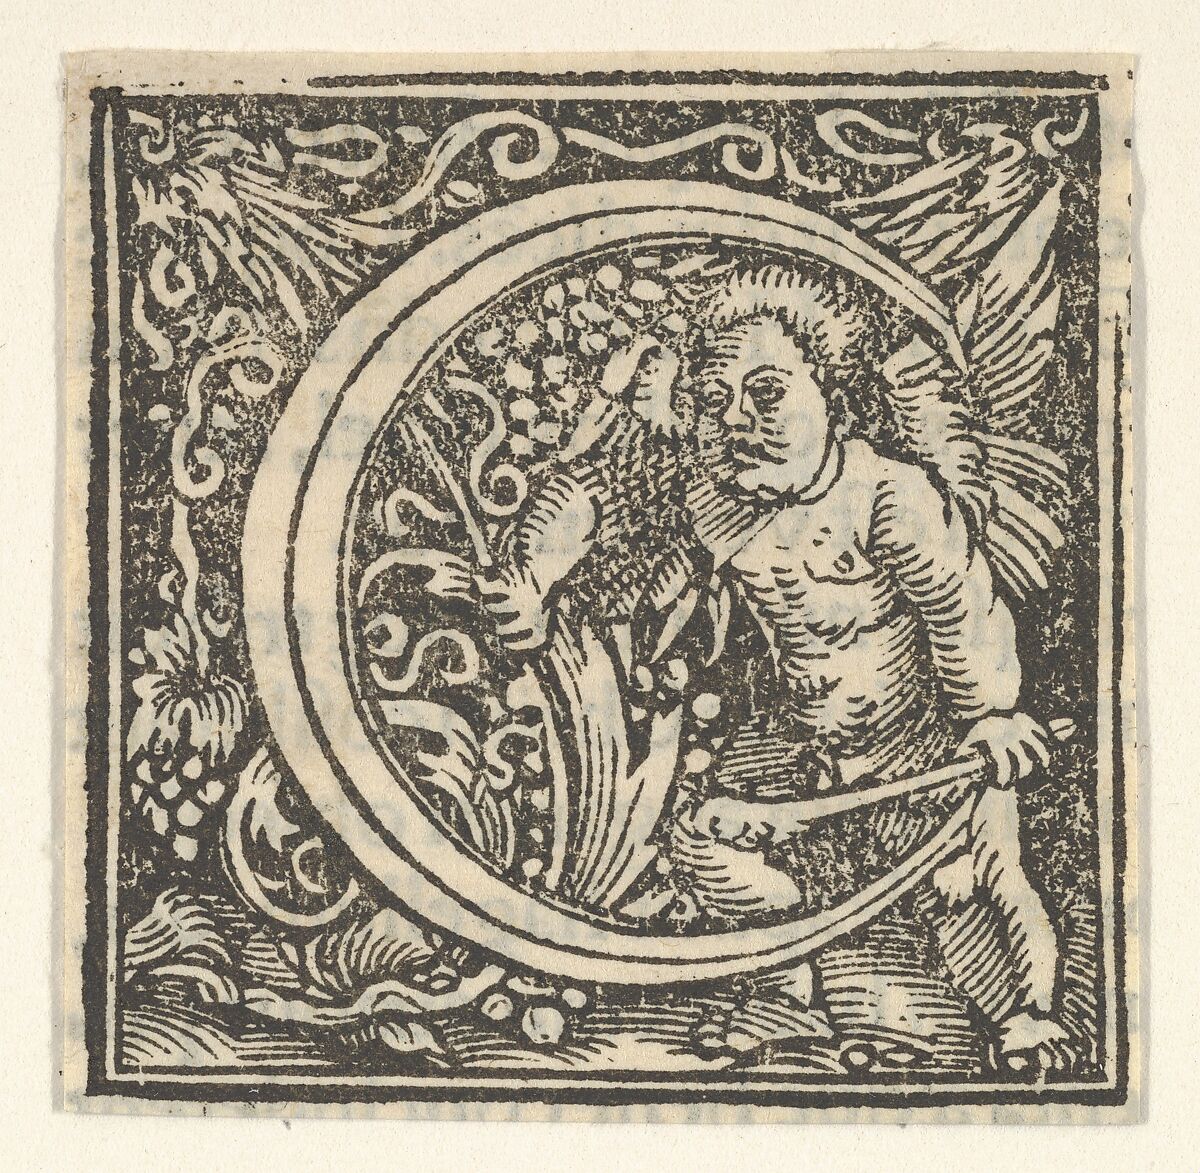 Initial letter C with putto, Heinrich Vogtherr the Elder (German, born 1490, active 1538–1540), Woodcut 